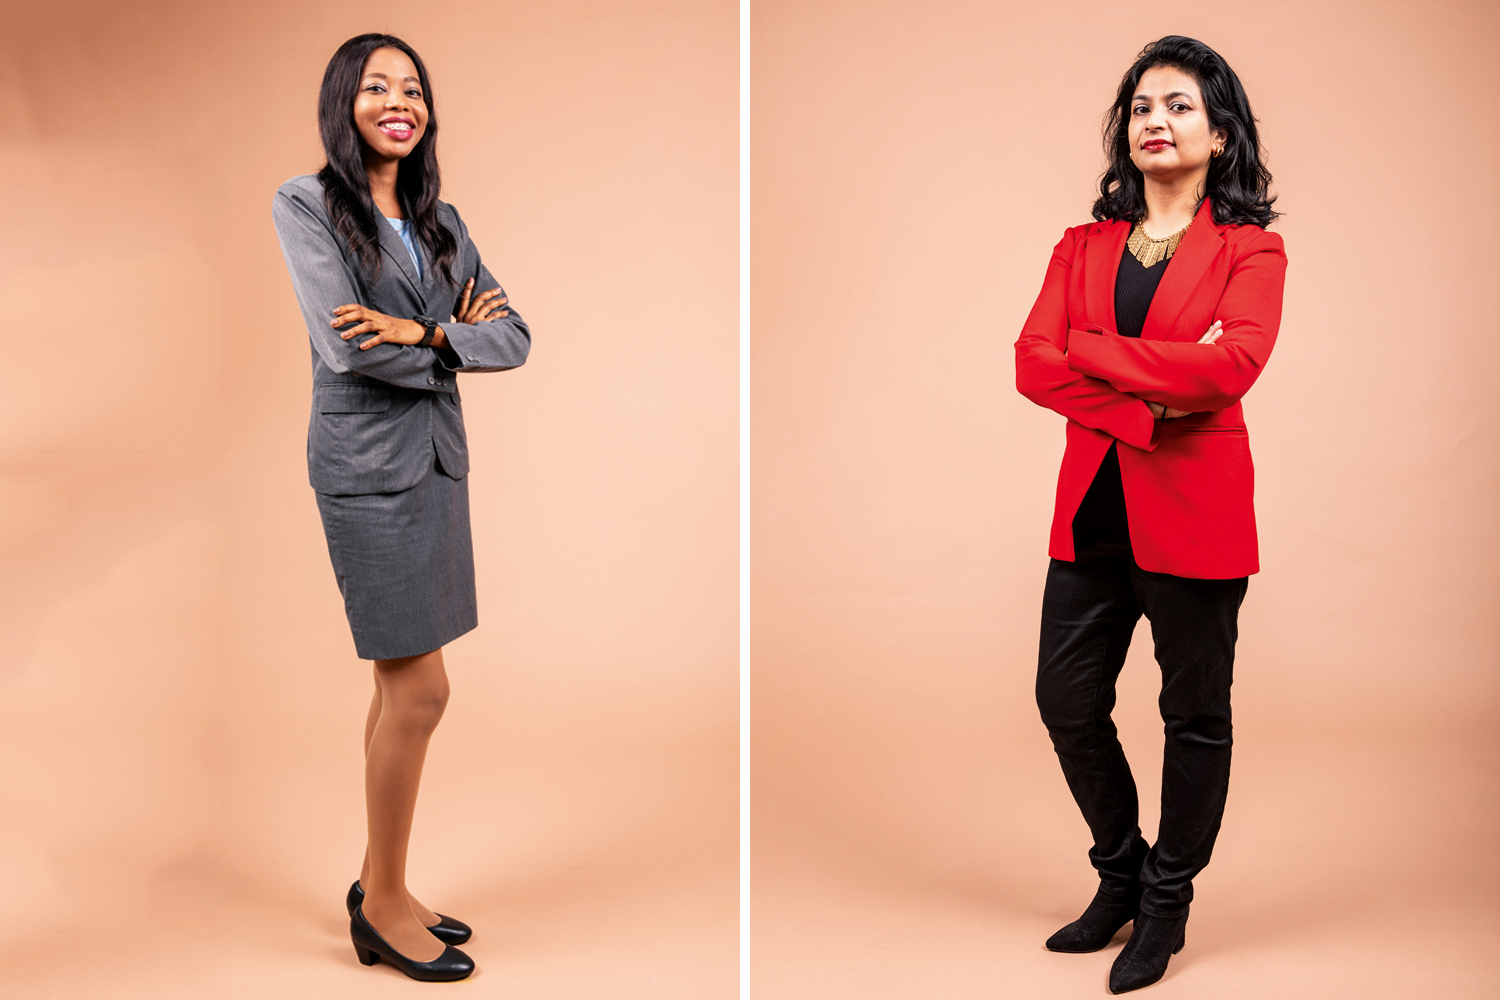 Why Female Mentorship Matters The Women Helping Each Other To Succeed People Hotelier 